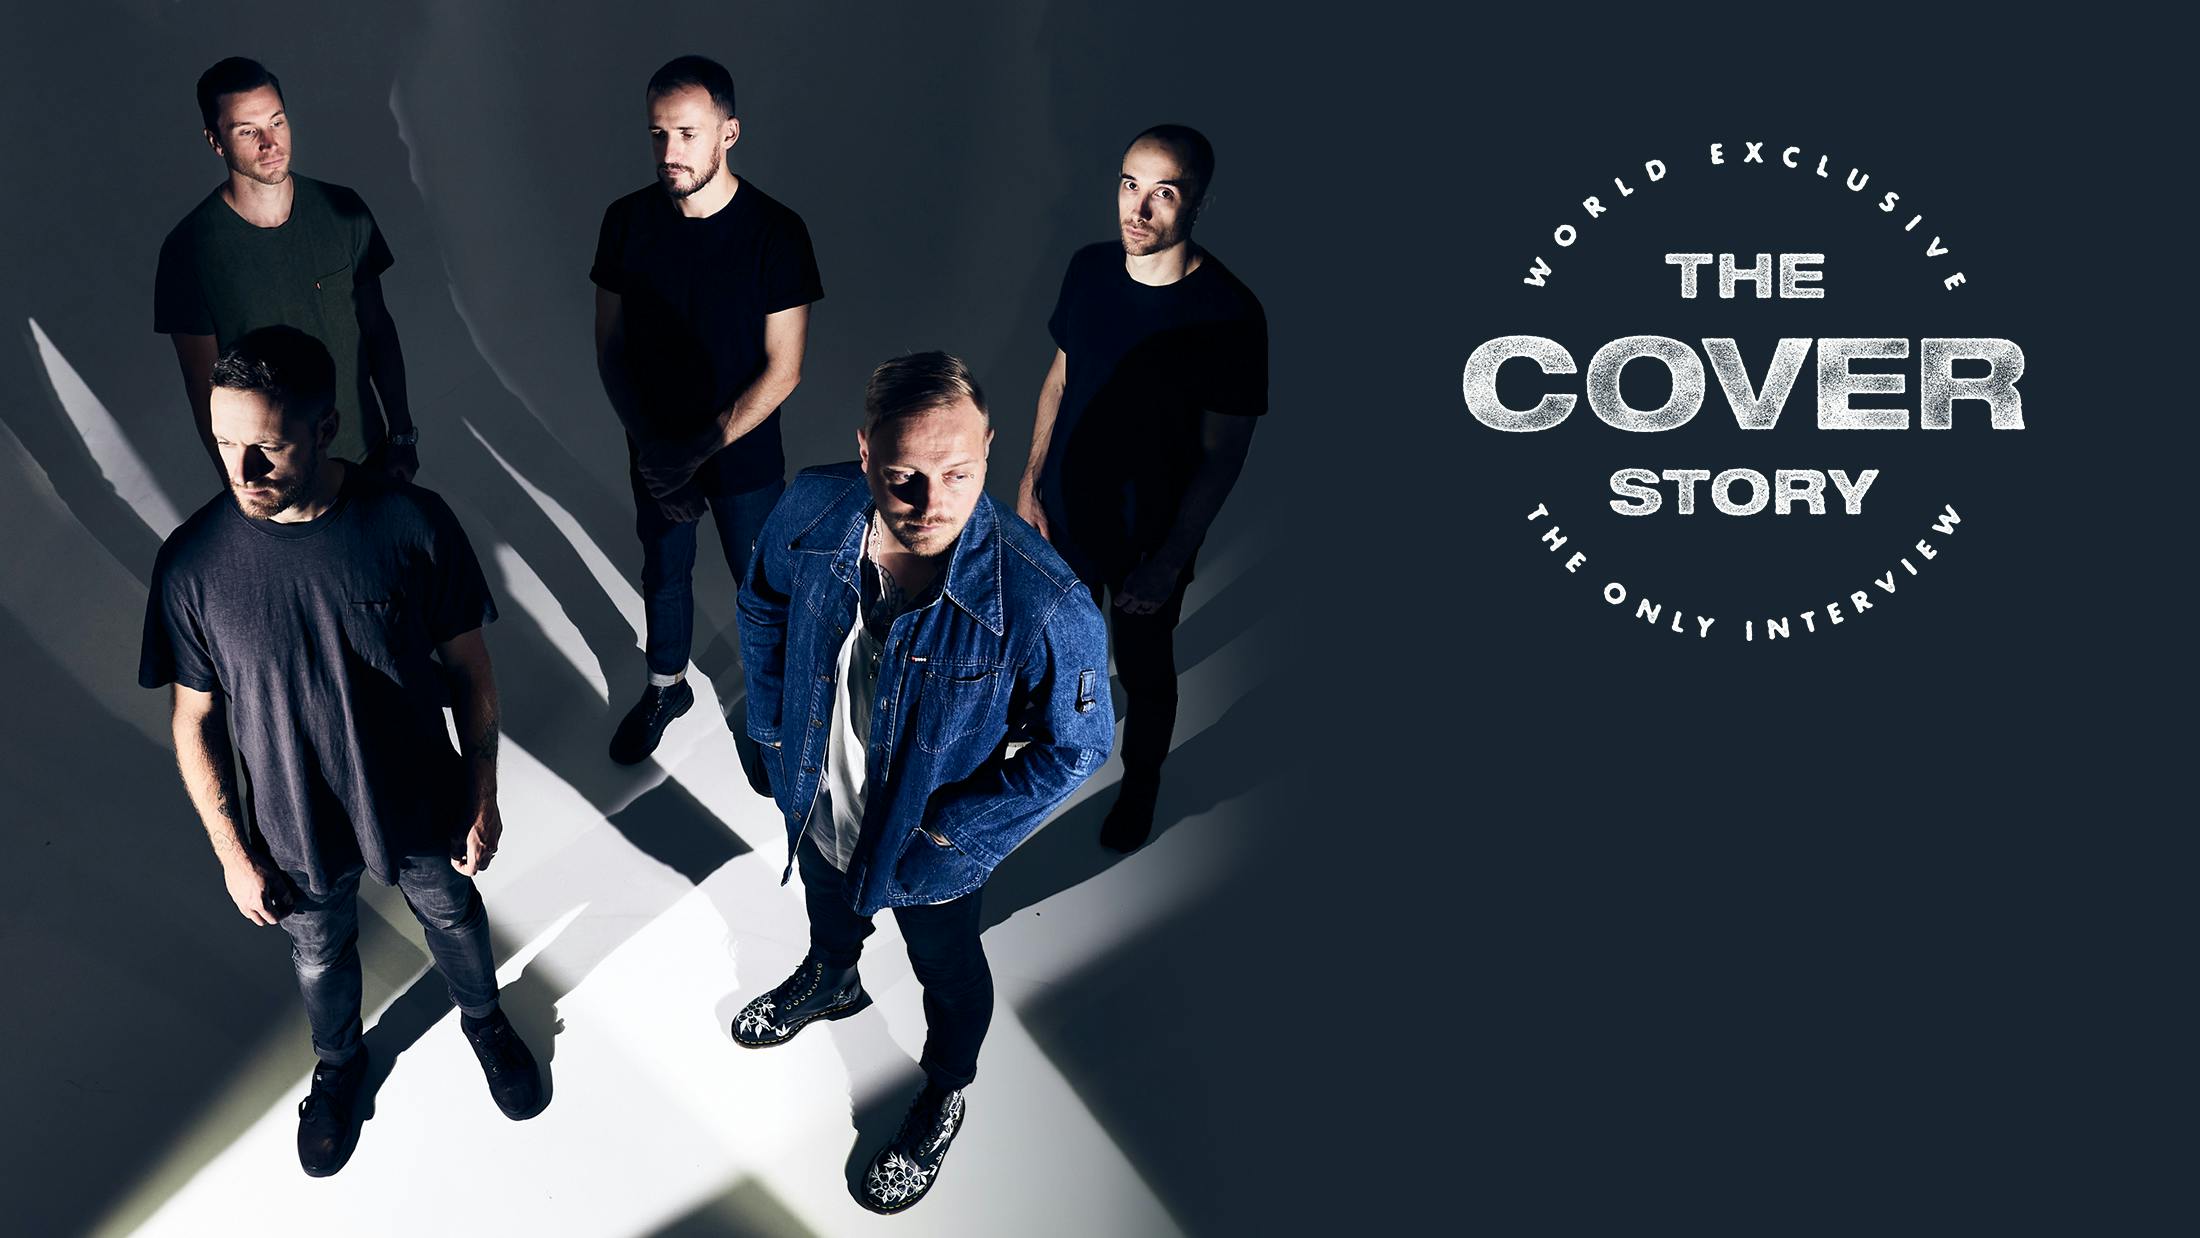 "The world is dying and no-one cares": Inside Architects' epic new album – the only Interview